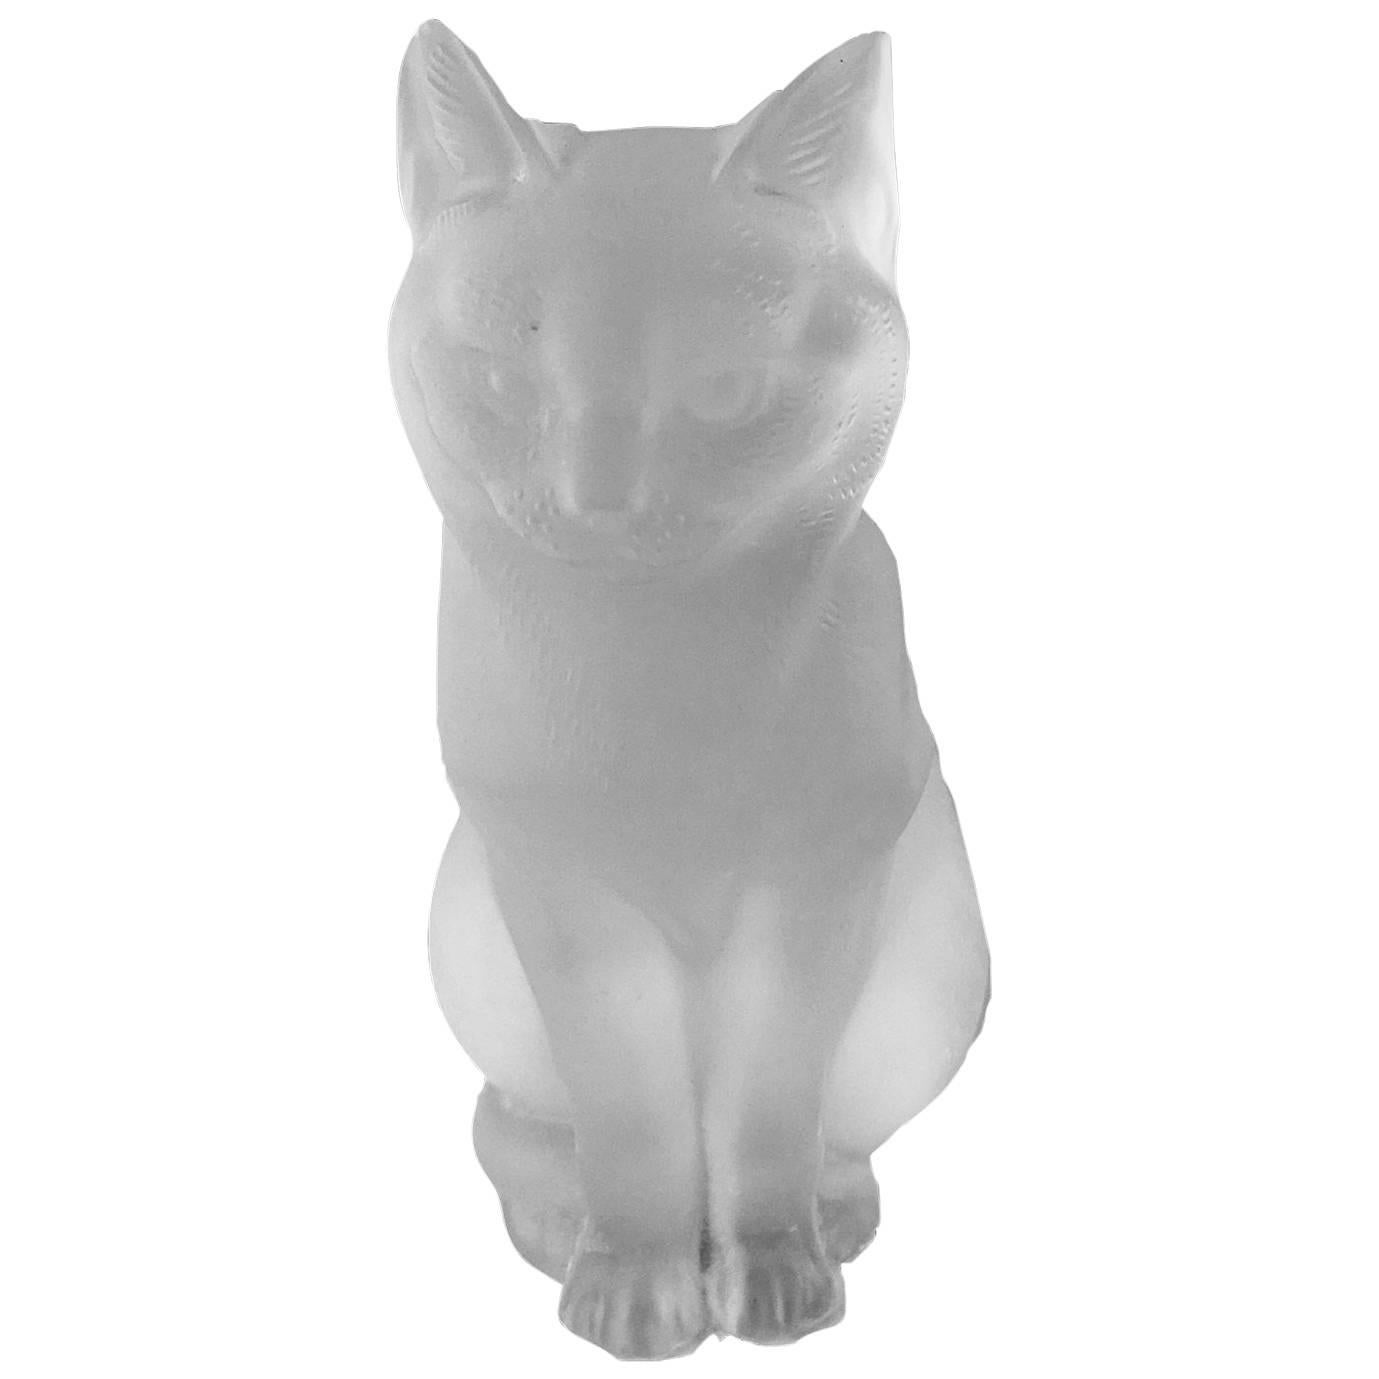 French Lalique Frosted Glass Statuette of a Seated Cat Chat Assis, 1970s For Sale